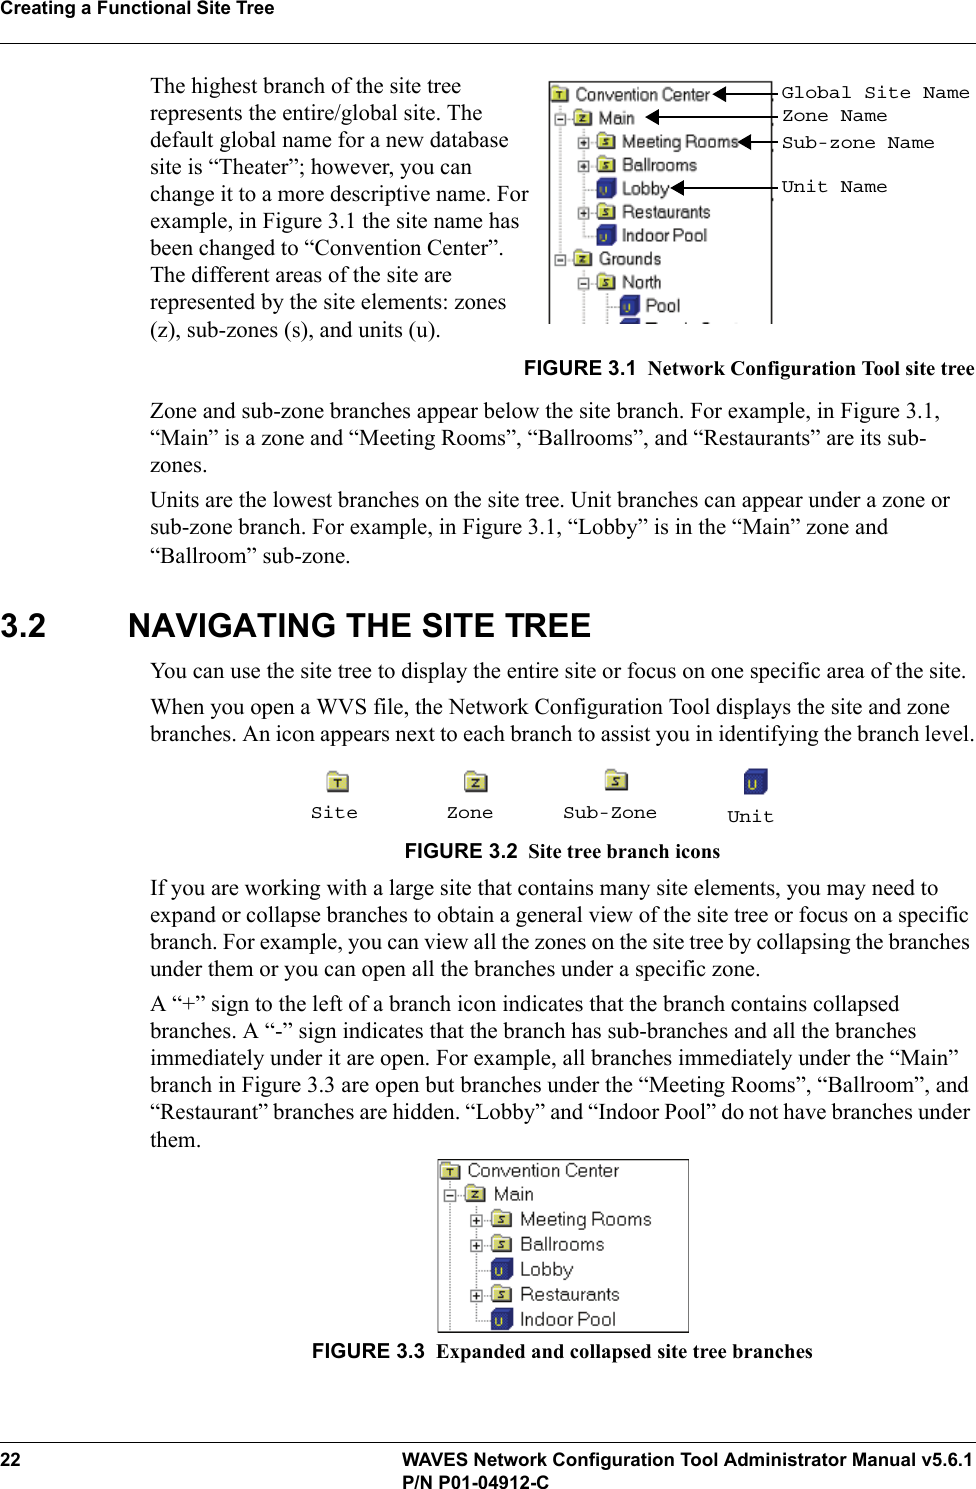 Creating a Functional Site Tree22 WAVES Network Configuration Tool Administrator Manual v5.6.1P/N P01-04912-CThe highest branch of the site tree represents the entire/global site. The default global name for a new database site is “Theater”; however, you can change it to a more descriptive name. For example, in Figure 3.1 the site name has been changed to “Convention Center”. The different areas of the site are represented by the site elements: zones (z), sub-zones (s), and units (u).FIGURE 3.1 Network Configuration Tool site treeZone and sub-zone branches appear below the site branch. For example, in Figure 3.1, “Main” is a zone and “Meeting Rooms”, “Ballrooms”, and “Restaurants” are its sub-zones.Units are the lowest branches on the site tree. Unit branches can appear under a zone or sub-zone branch. For example, in Figure 3.1, “Lobby” is in the “Main” zone and “Ballroom” sub-zone.3.2 NAVIGATING THE SITE TREEYou can use the site tree to display the entire site or focus on one specific area of the site.When you open a WVS file, the Network Configuration Tool displays the site and zone branches. An icon appears next to each branch to assist you in identifying the branch level.FIGURE 3.2 Site tree branch iconsIf you are working with a large site that contains many site elements, you may need to expand or collapse branches to obtain a general view of the site tree or focus on a specific branch. For example, you can view all the zones on the site tree by collapsing the branches under them or you can open all the branches under a specific zone.A “+” sign to the left of a branch icon indicates that the branch contains collapsed branches. A “-” sign indicates that the branch has sub-branches and all the branches immediately under it are open. For example, all branches immediately under the “Main” branch in Figure 3.3 are open but branches under the “Meeting Rooms”, “Ballroom”, and “Restaurant” branches are hidden. “Lobby” and “Indoor Pool” do not have branches under them.FIGURE 3.3 Expanded and collapsed site tree branchesGlobal Site NameZone NameSub-zone NameUnit NameSite Zone Sub-Zone Unit